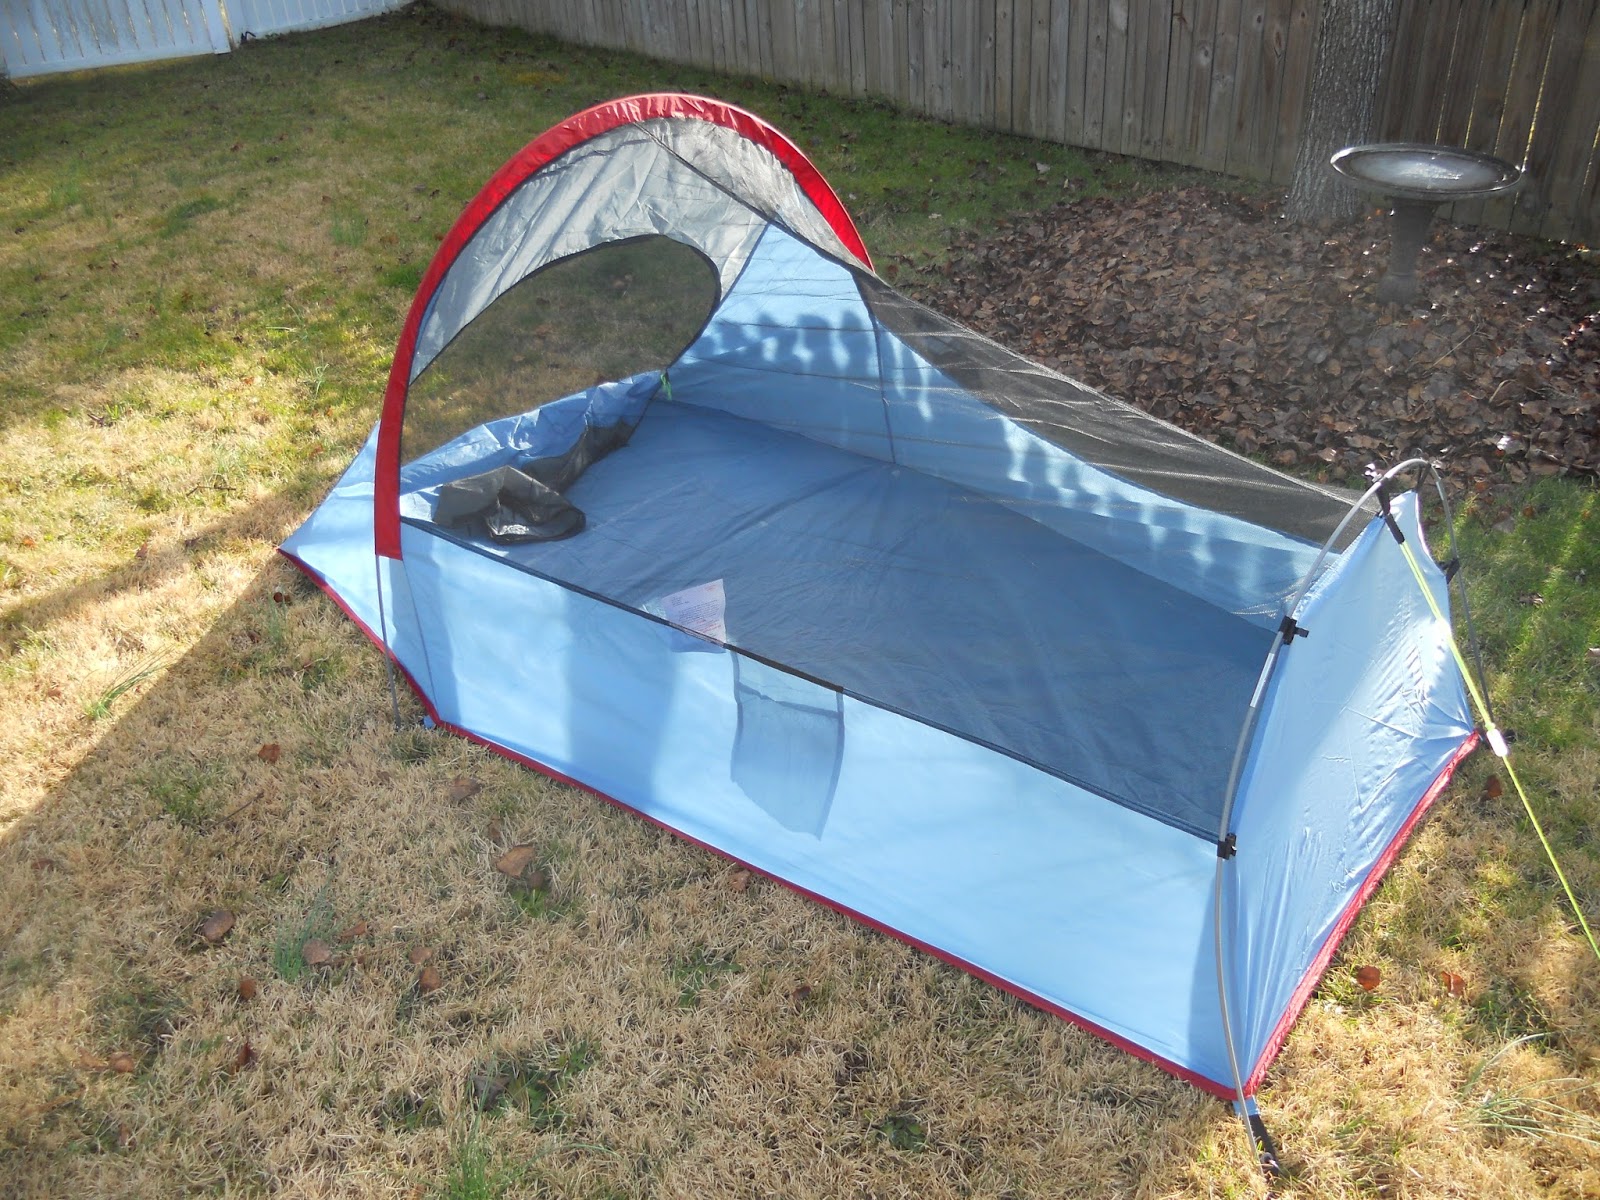 Texsport Saguaro Bivy Shelter Tent from Port Side Looking Forward